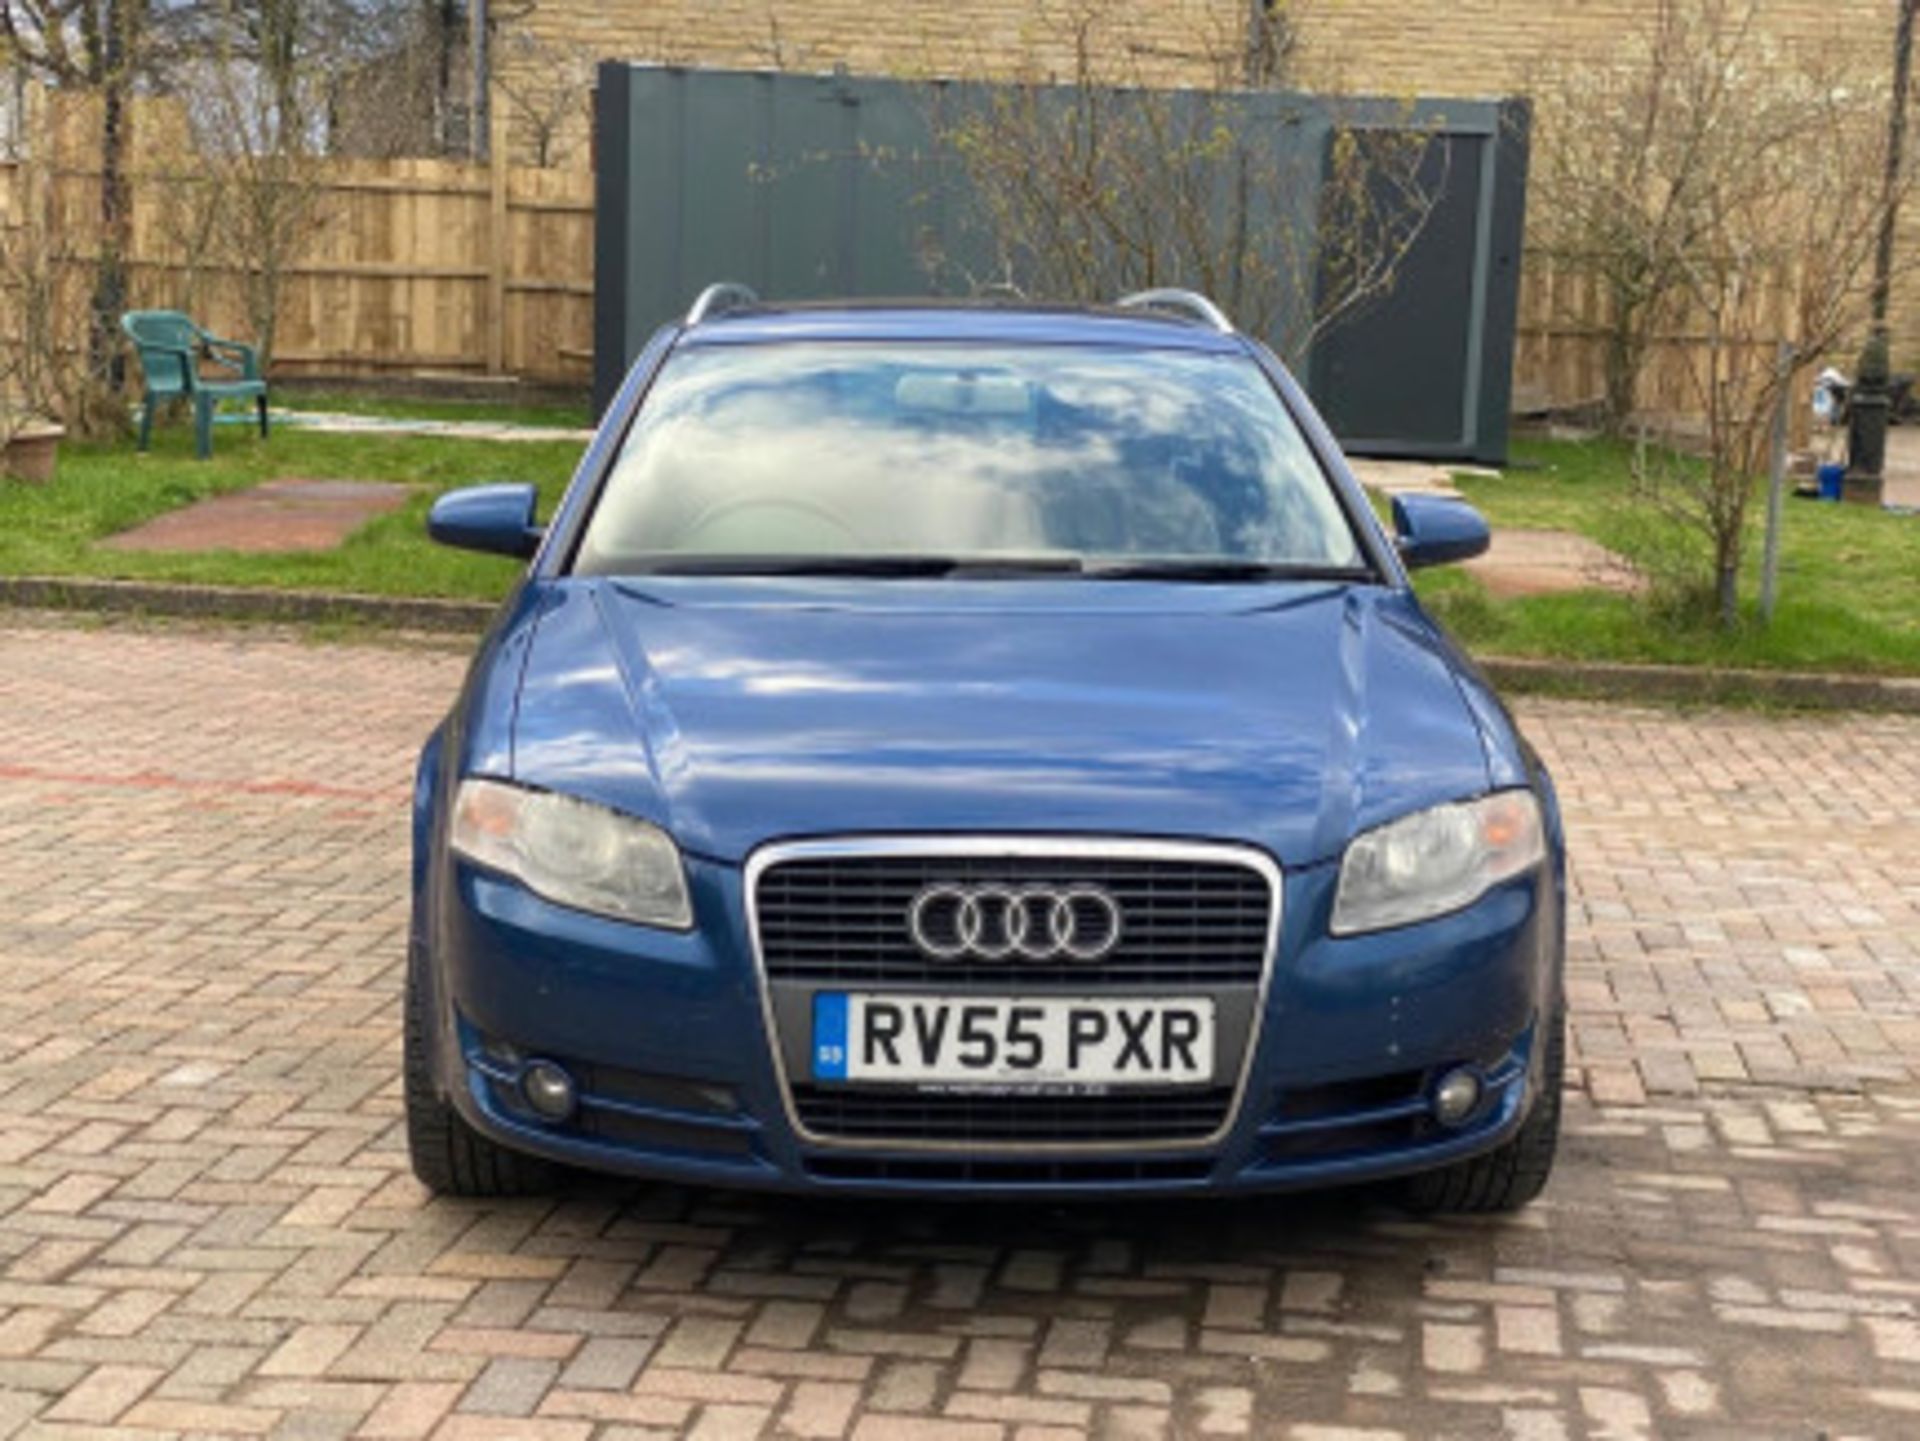 AUDI A4 AVANT 1.9 TDI SE 5DR ESTATE - RARE AND RELIABLE LUXURY WAGON >>--NO VAT ON HAMMER--<< - Image 27 of 63